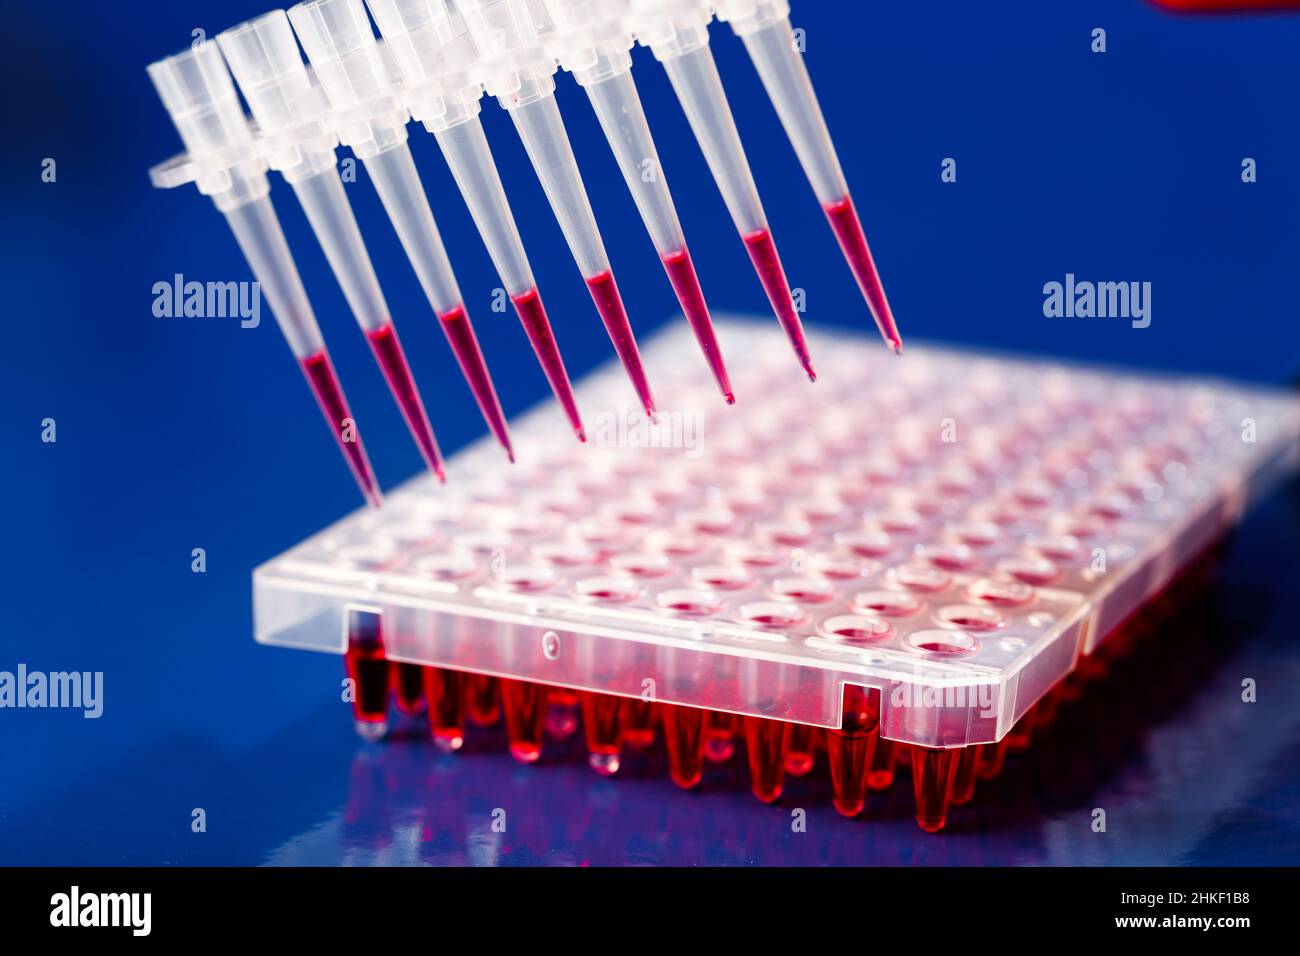 96 well plates in the laboratory of genetic modification using CRISPR technology Stock Photo